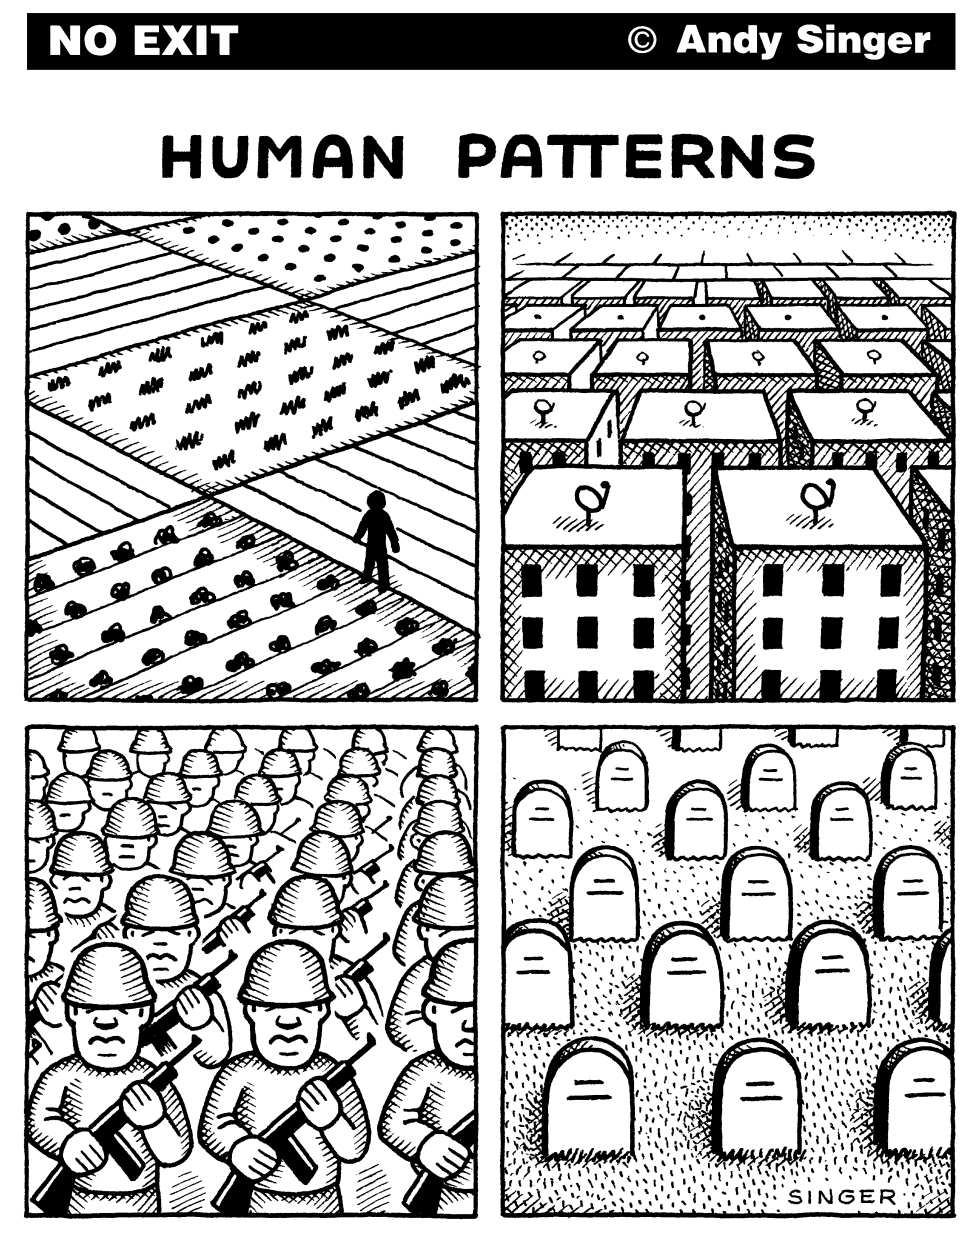 HUMAN PATTERNS by Andy Singer